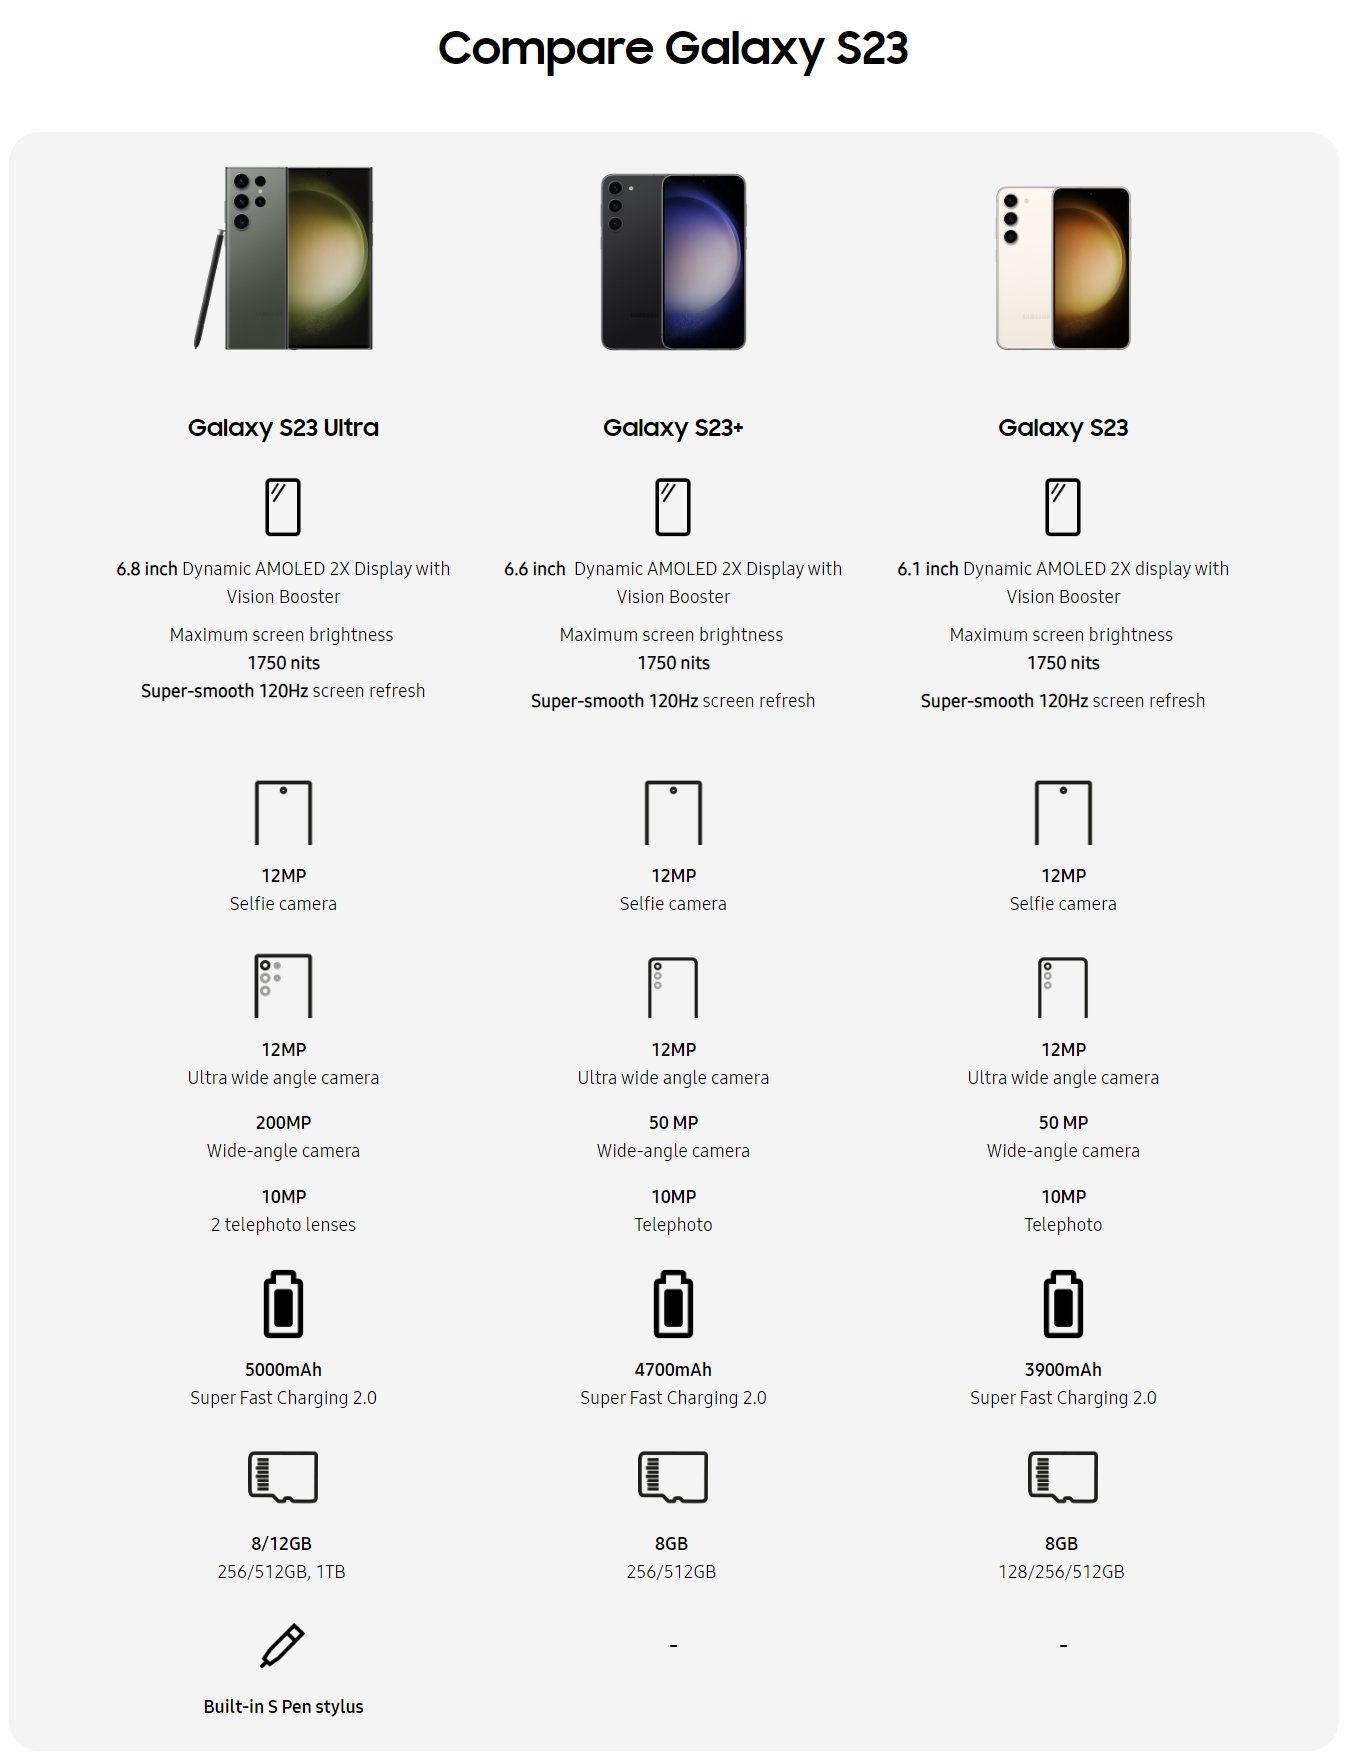 Samsung Galaxy S23: Is this the official pricing in Malaysia? - SoyaCincau